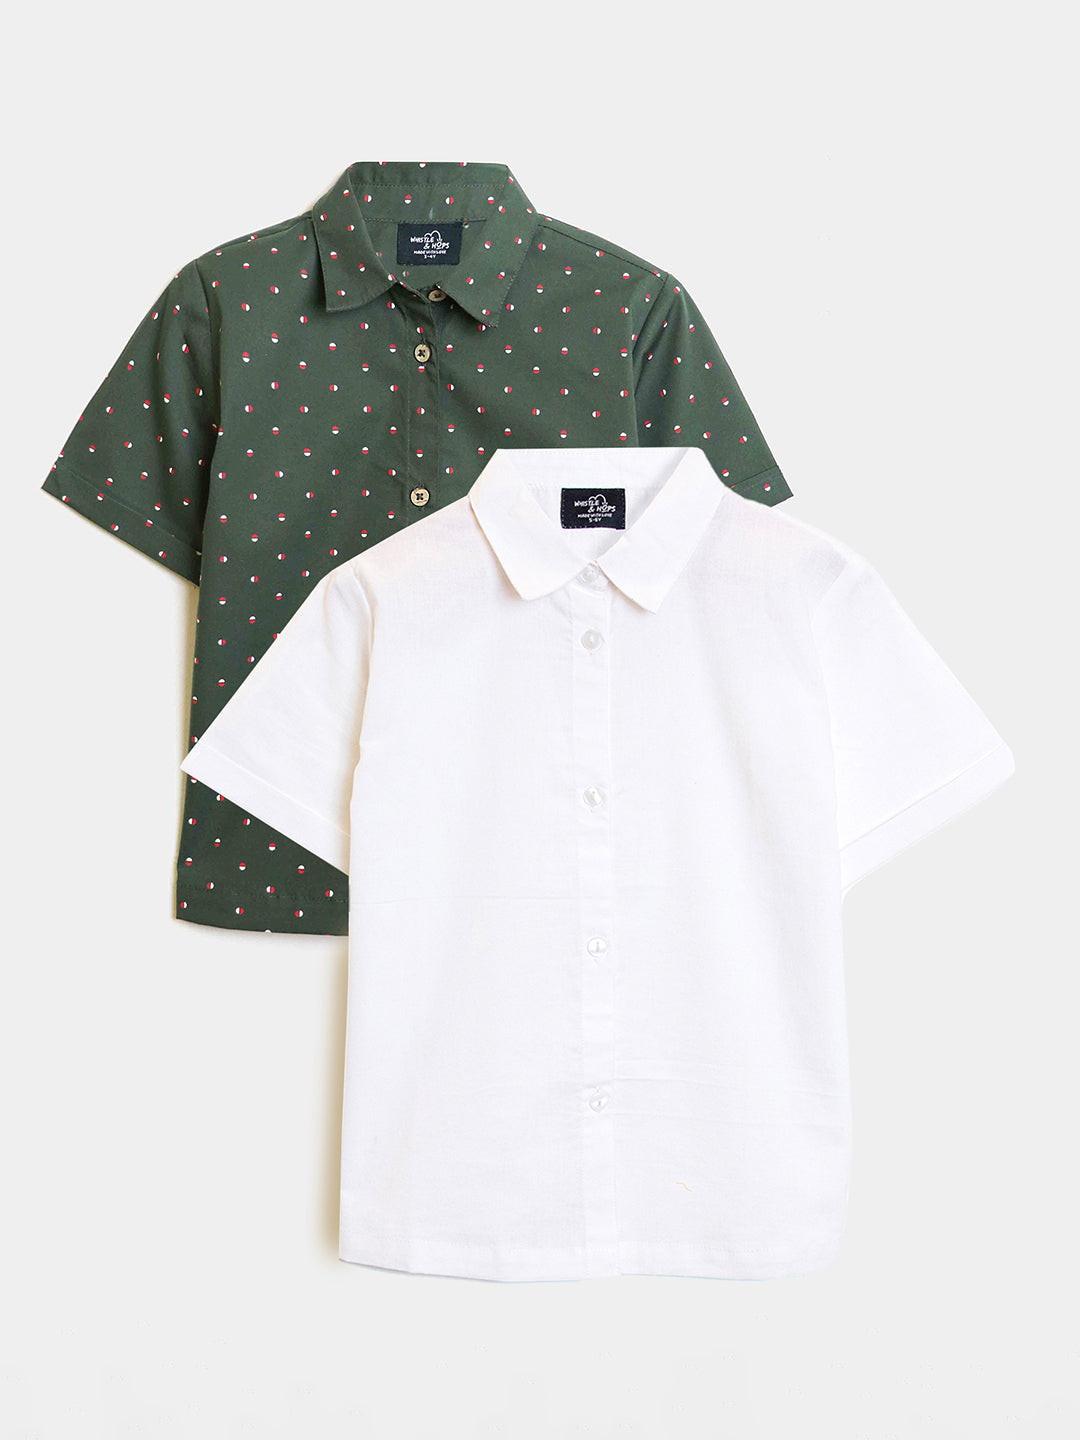 Boys Cotton Shirts Combo- Green and White